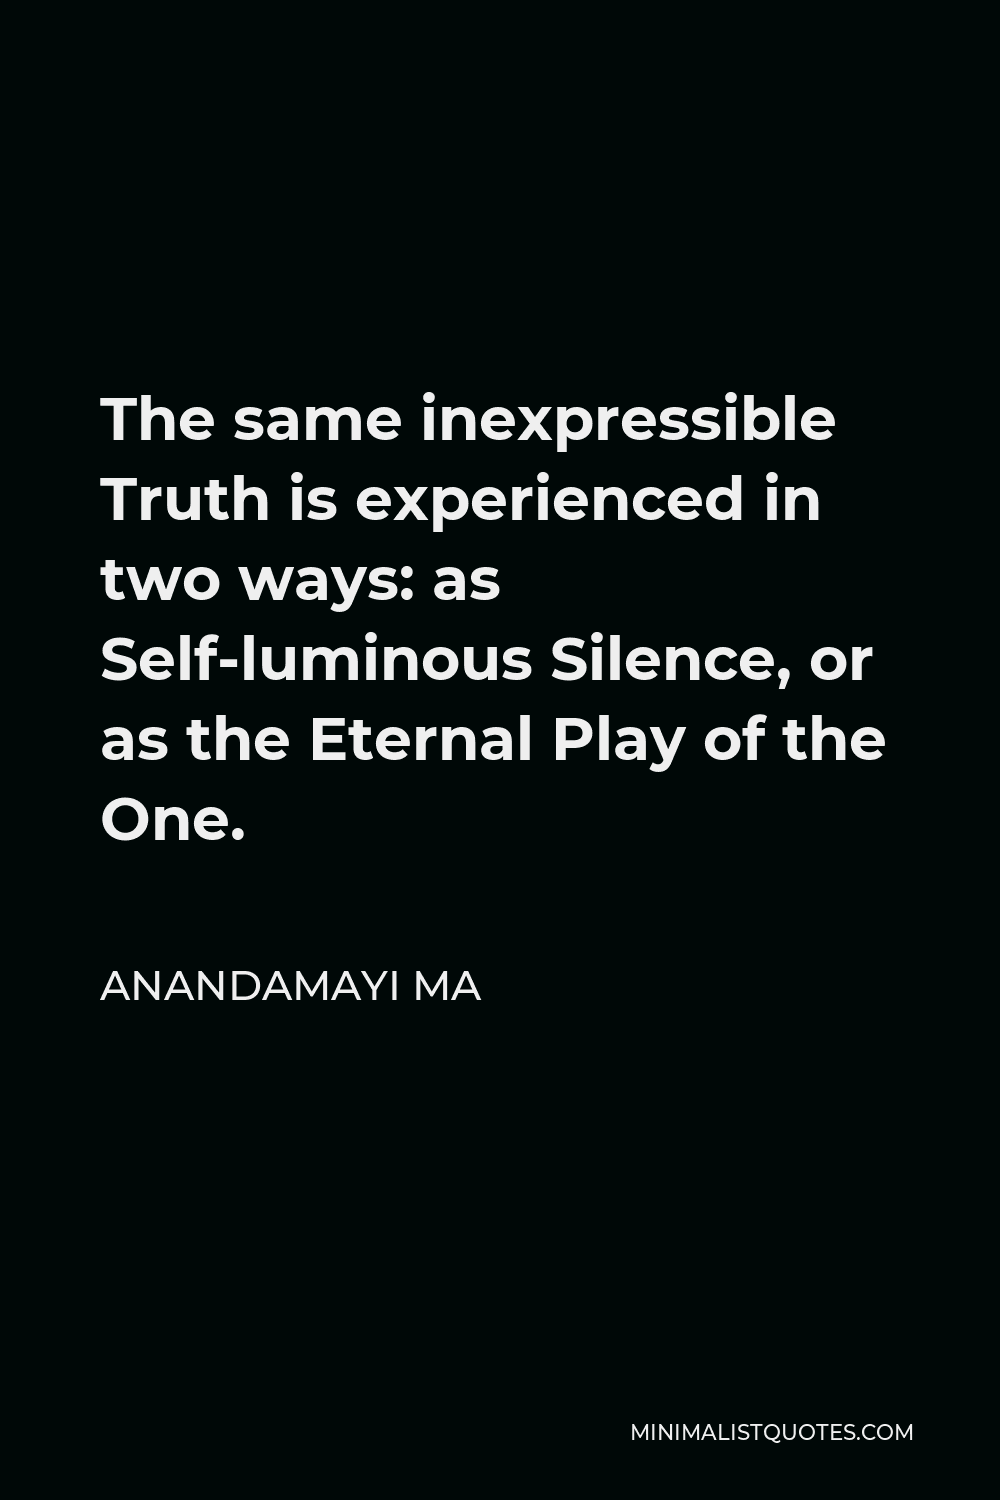 Anandamayi Ma Quote - The same inexpressible Truth is experienced in two ways: as Self-luminous Silence, or as the Eternal Play of the One.